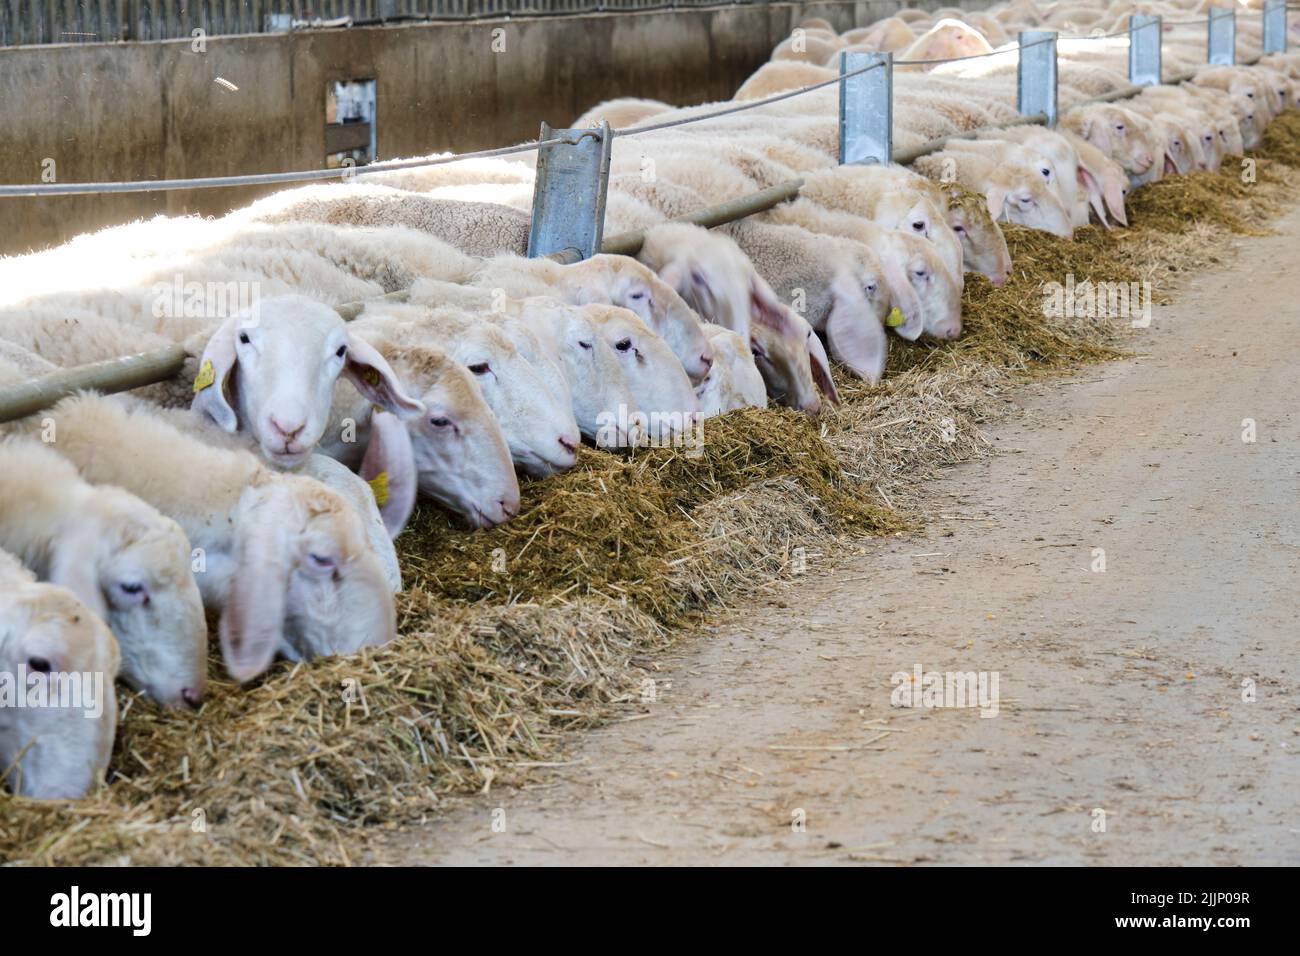 Close-up of some sheep eating hay in the stable behind an iron fence Stock Photo